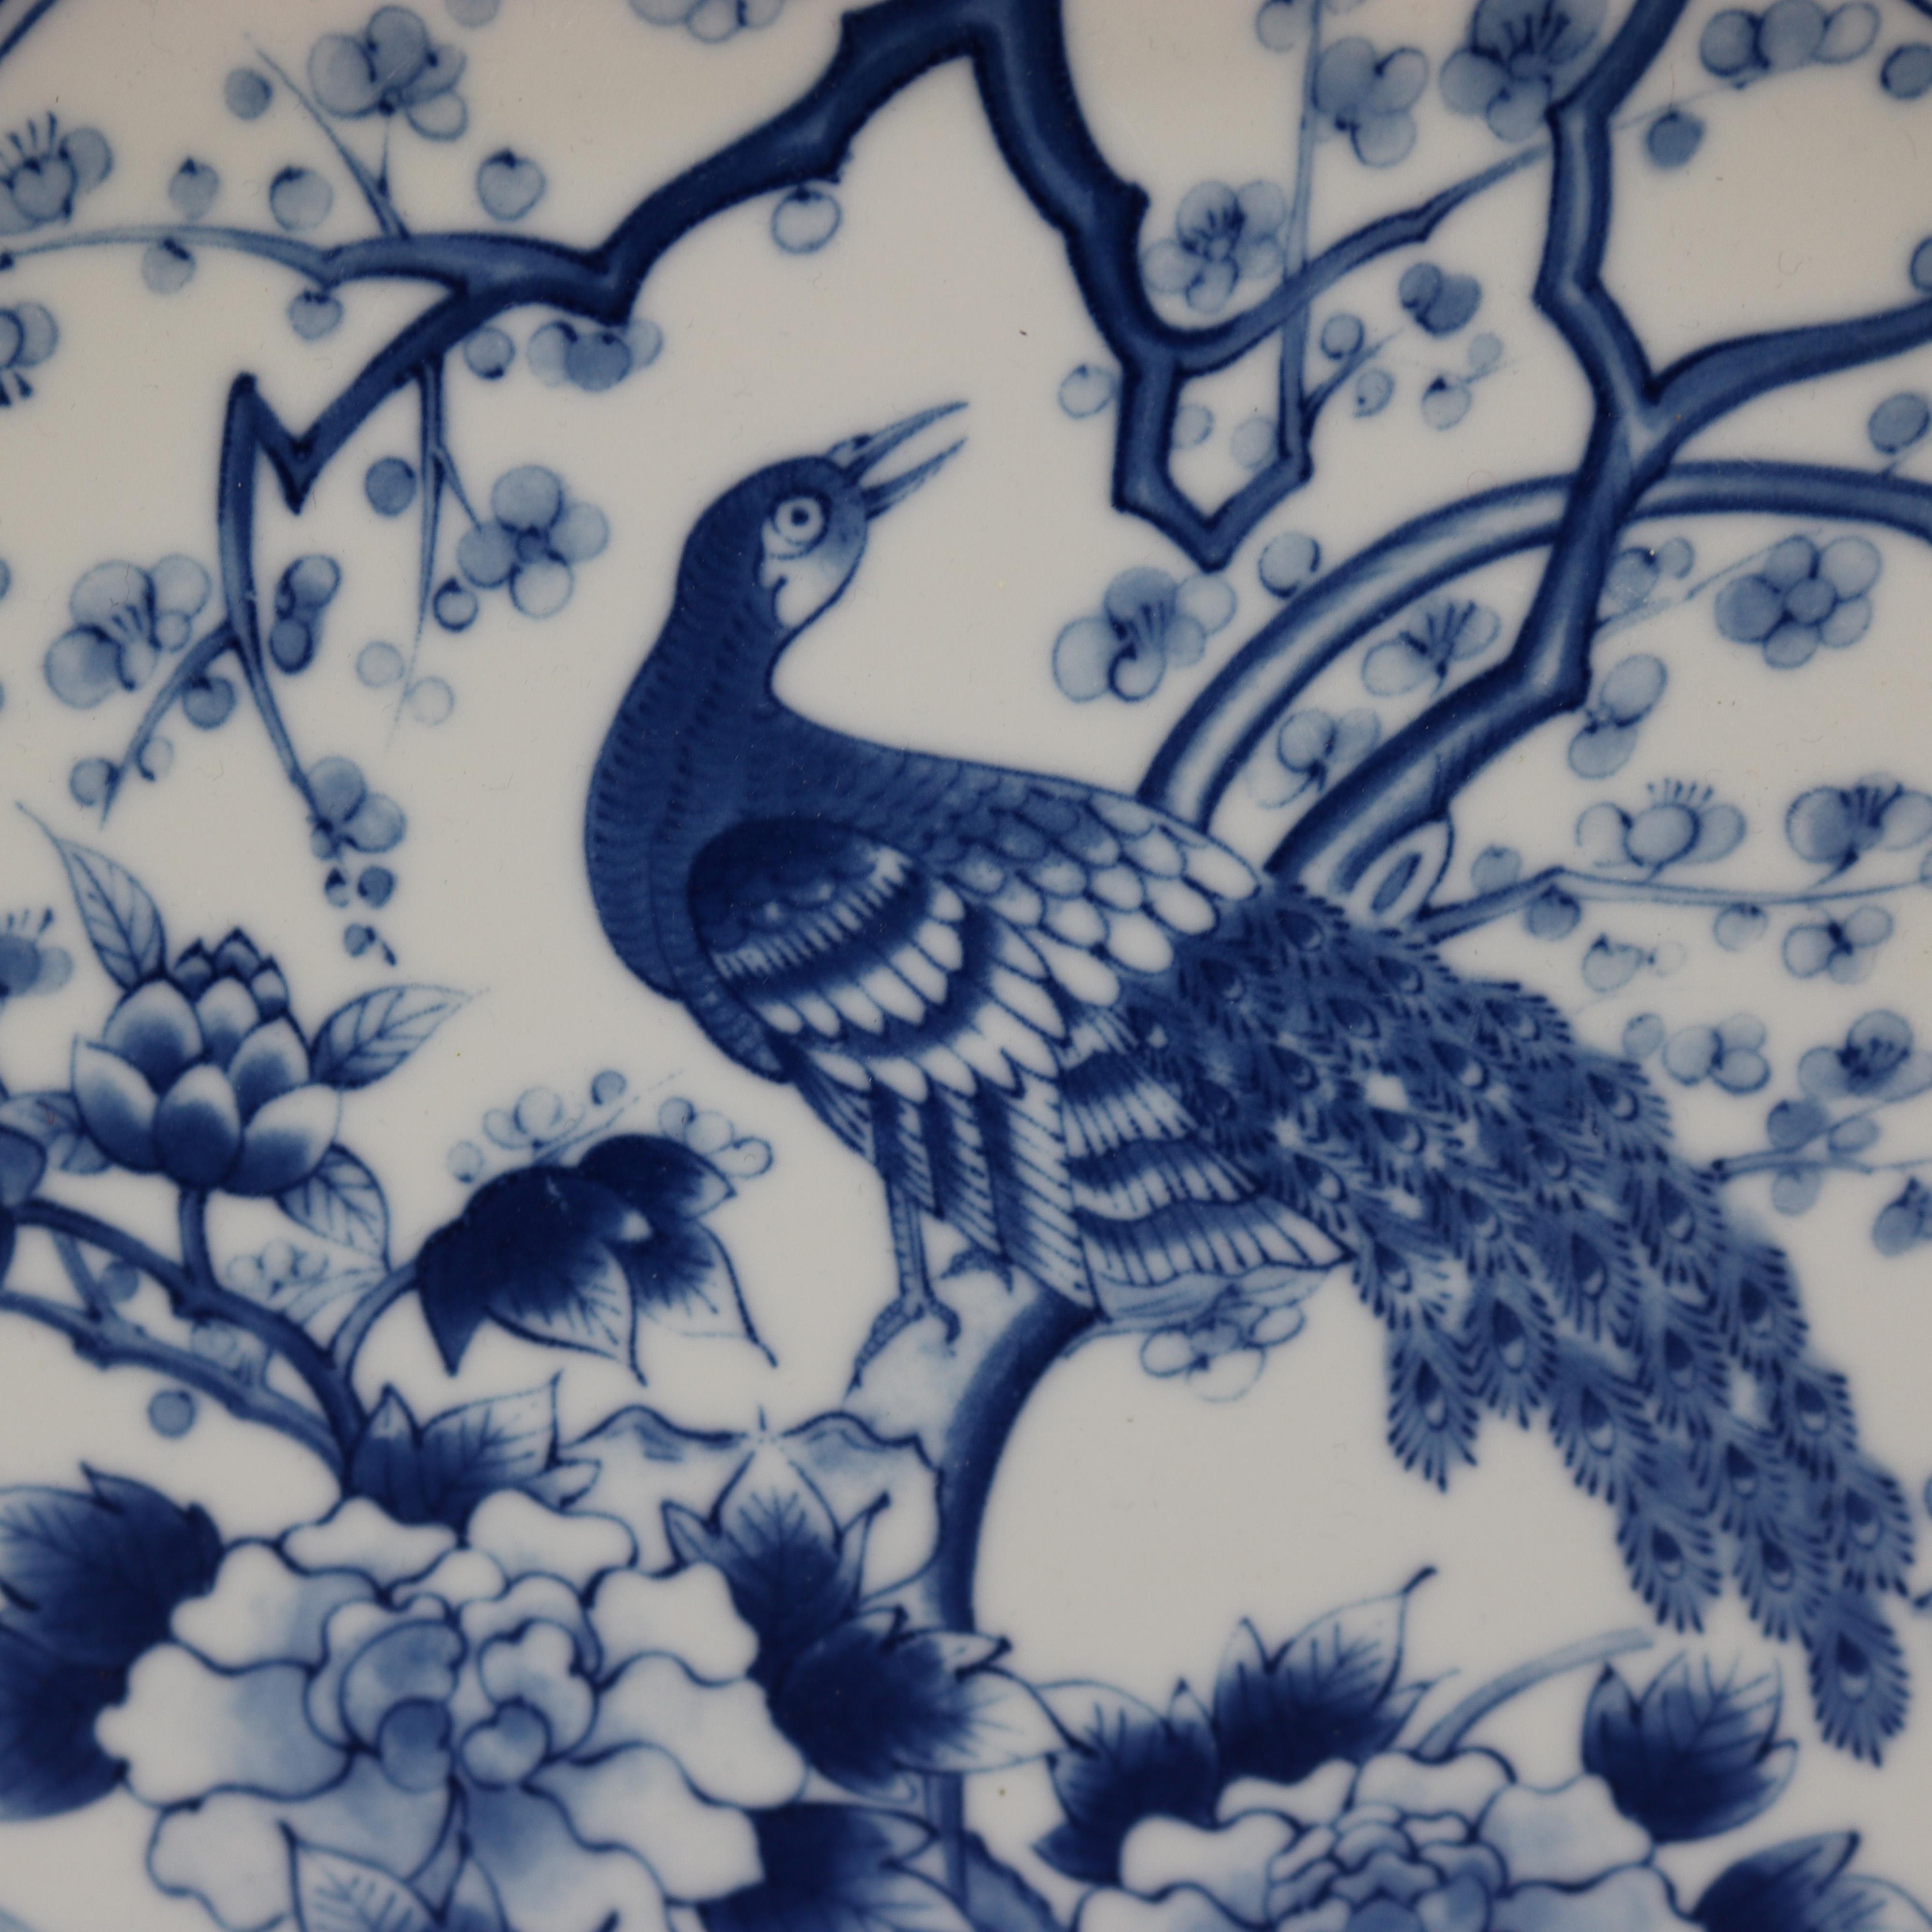 An antique Japanese Meiji low bowl offers blue decorated porcelain with central garden scene having peacock with lattice surround having foliate reserves, en verso signed as photographed, 20th century

Measures: 2.5